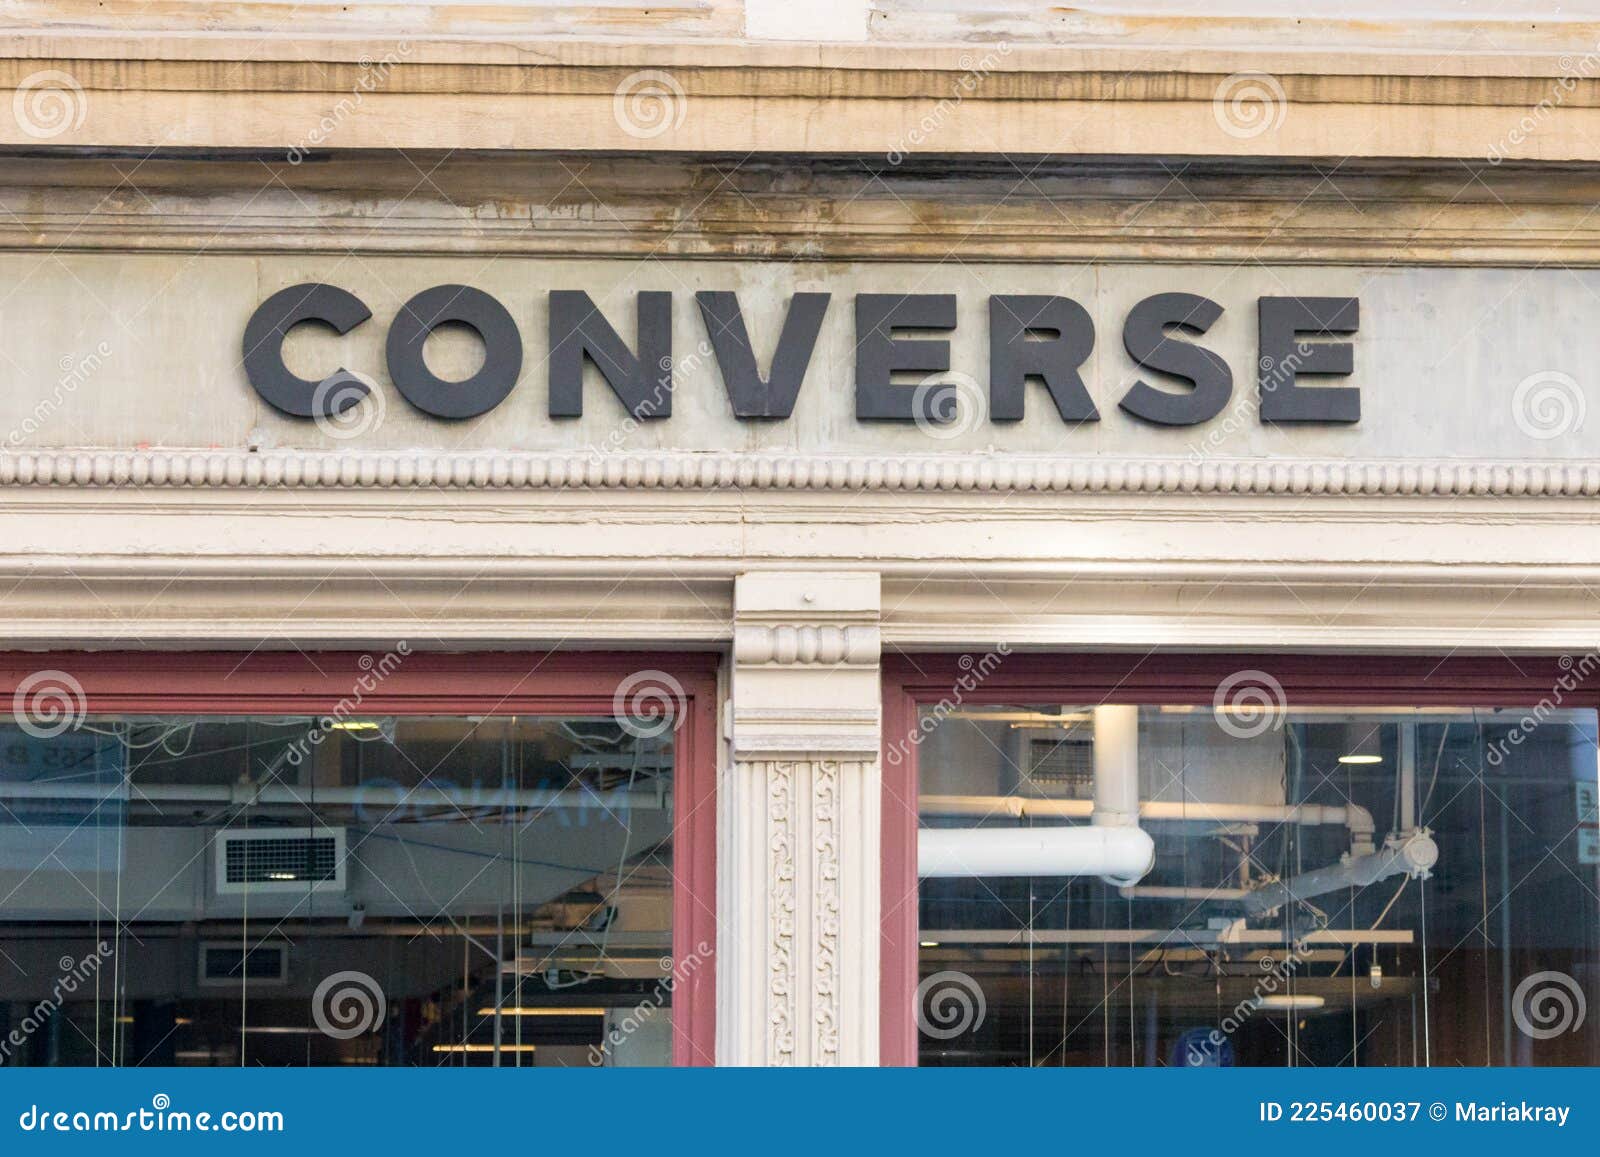 220 converse store photos free royalty free stock photos from dreamstime